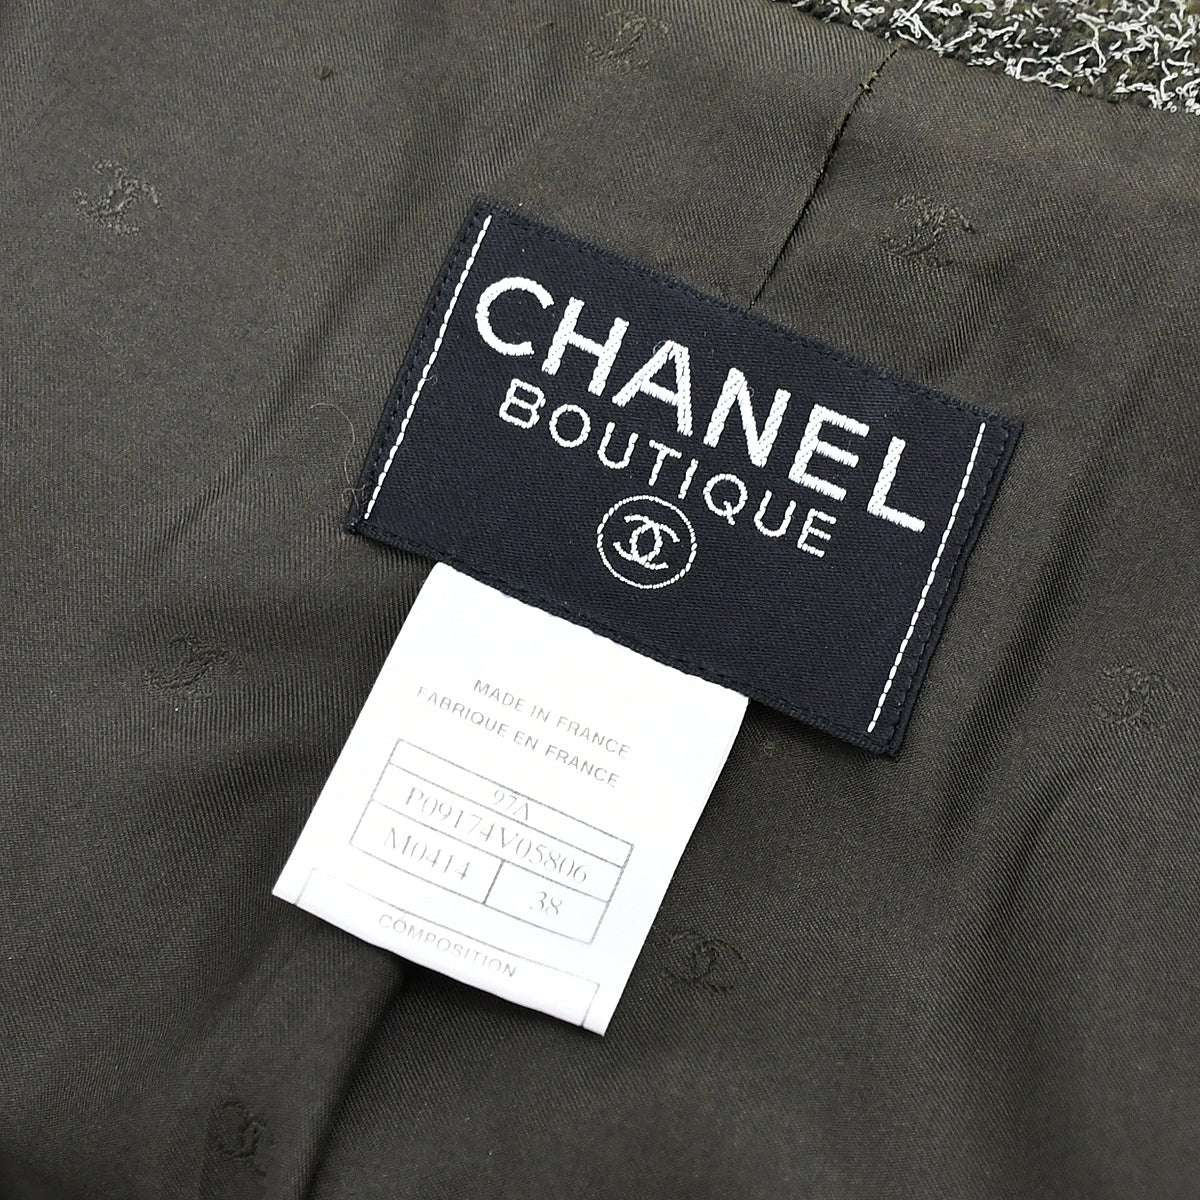 Chanel Single Breasted Jacket Green 97A 